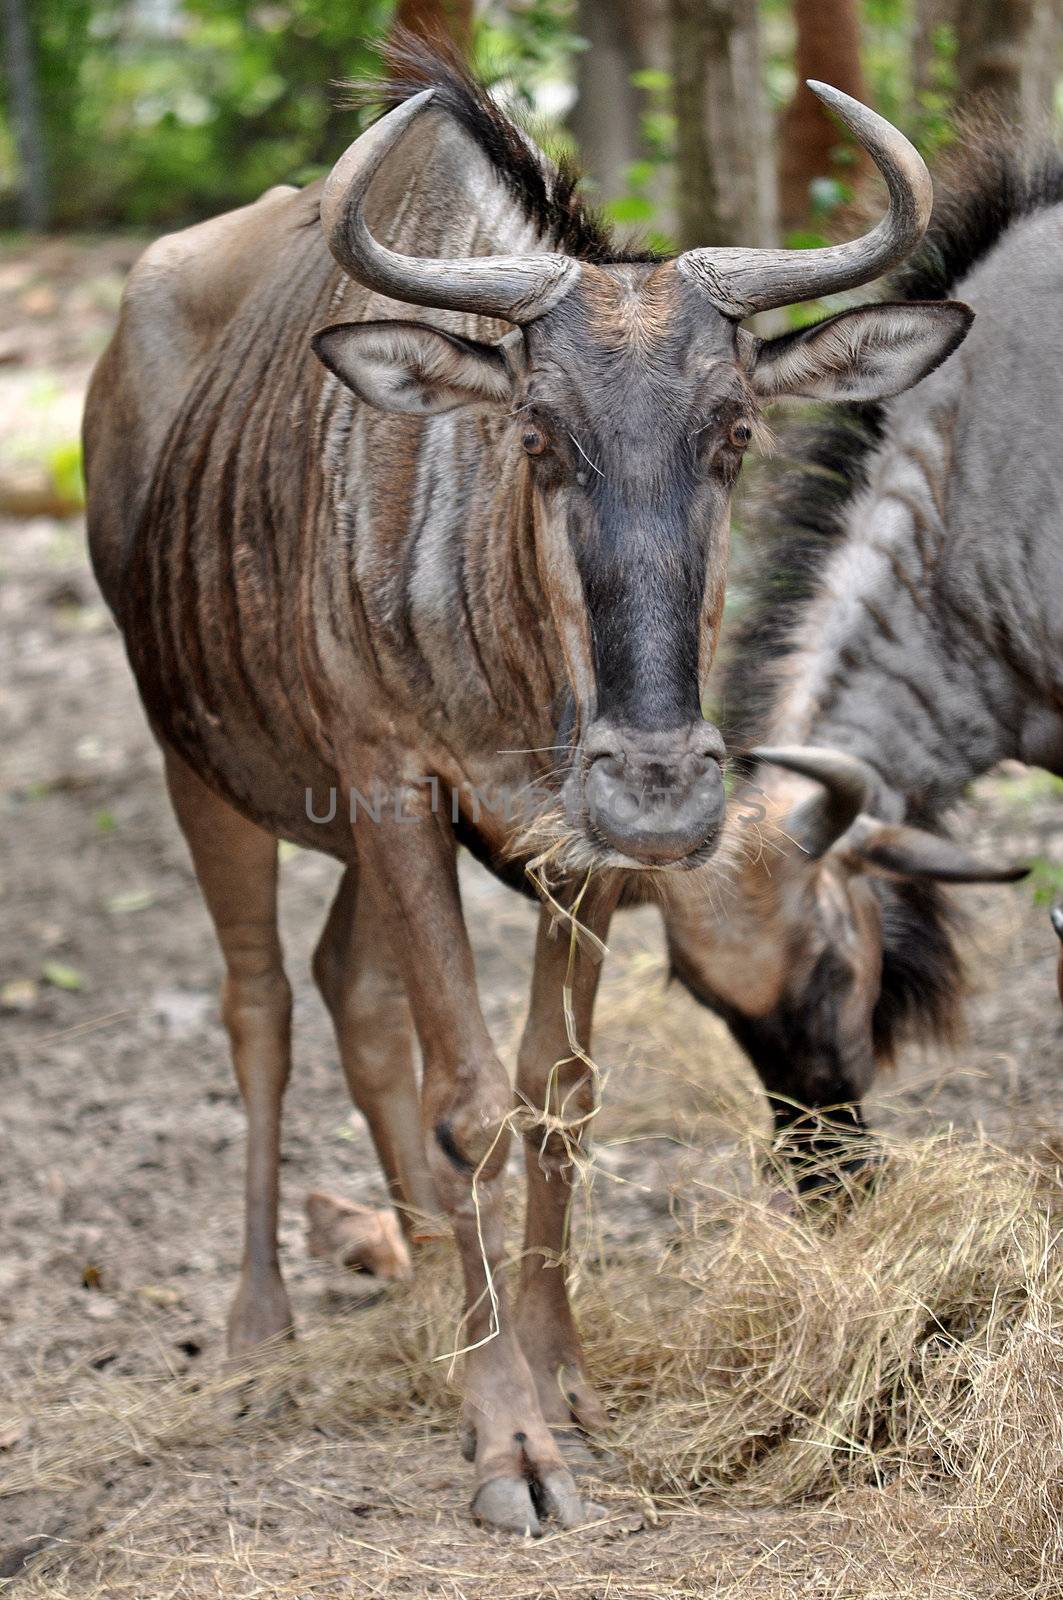 Due to their migratory ways, the wildebeest do not form permanent pair bonds or defend a set territory.